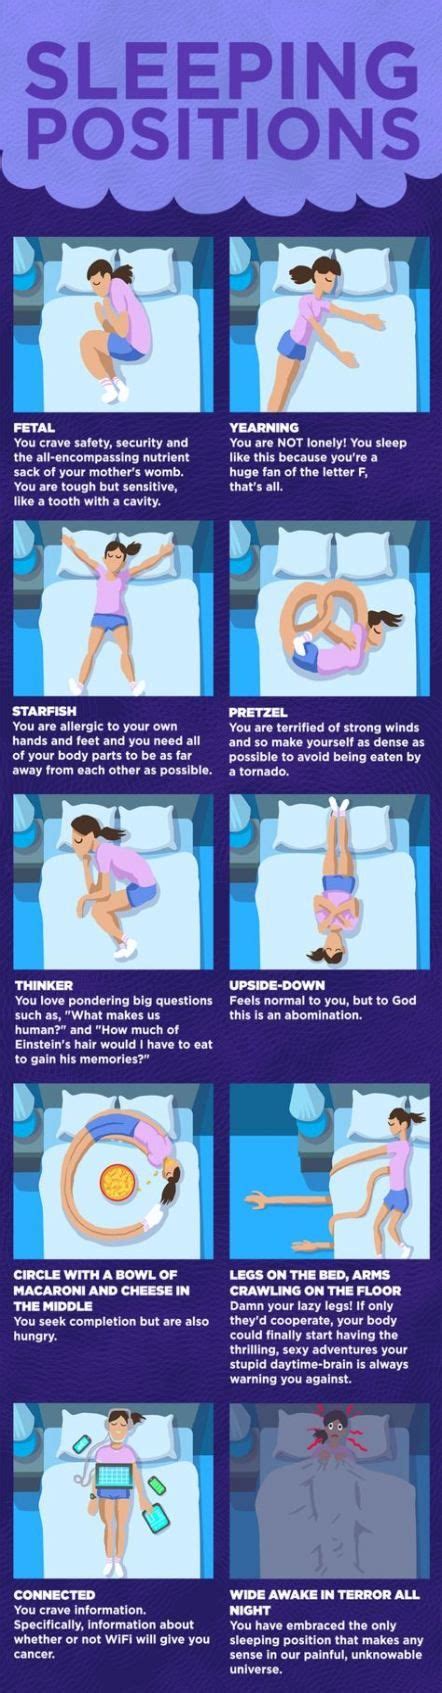 Best Funny Couple Sleeping Positions Night Ideas Funny